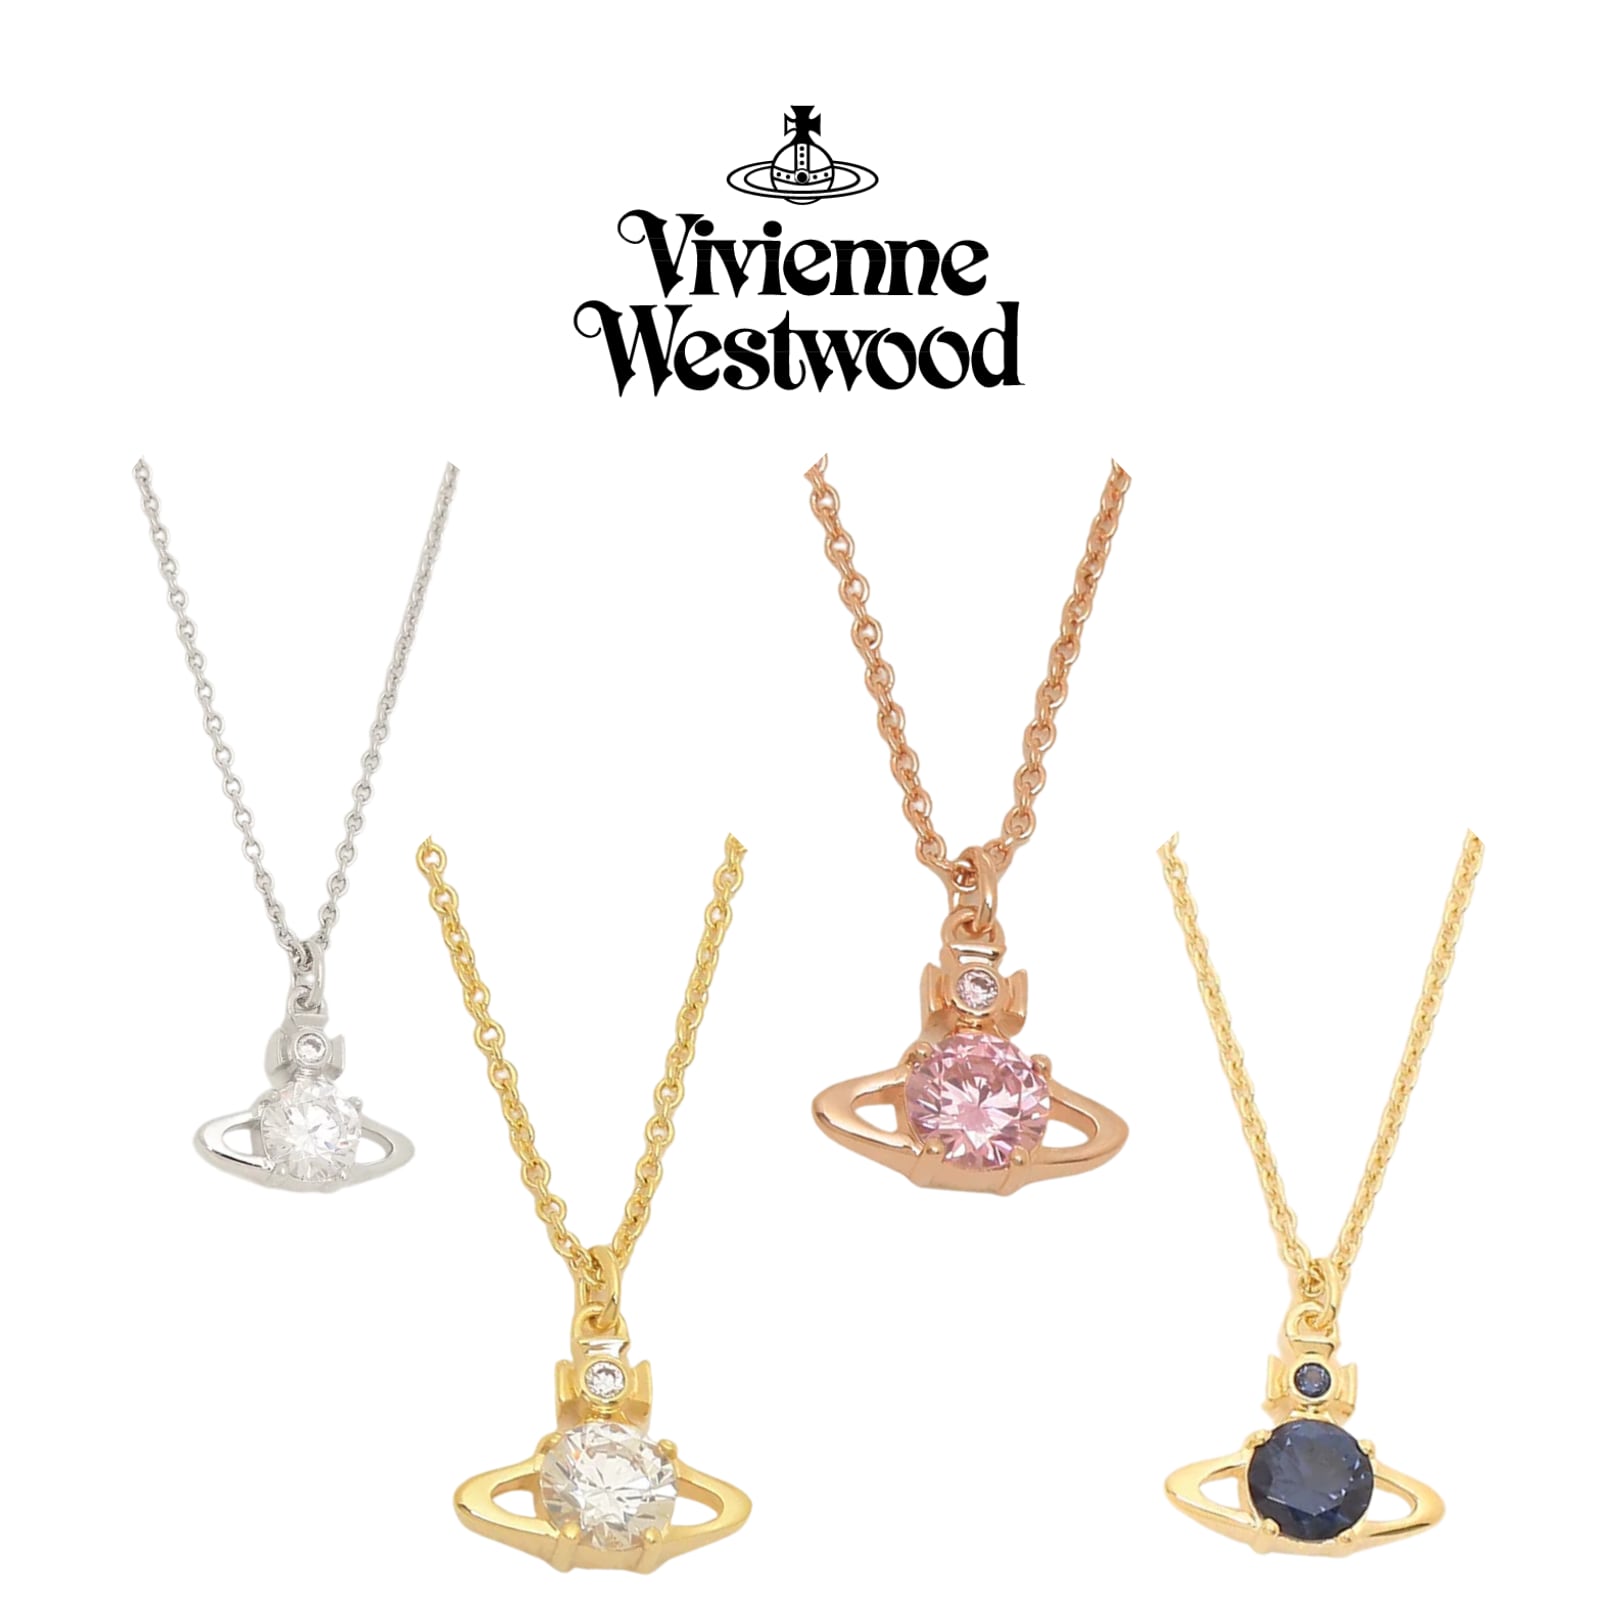 Vivienne Westwood ペンダントネックレス